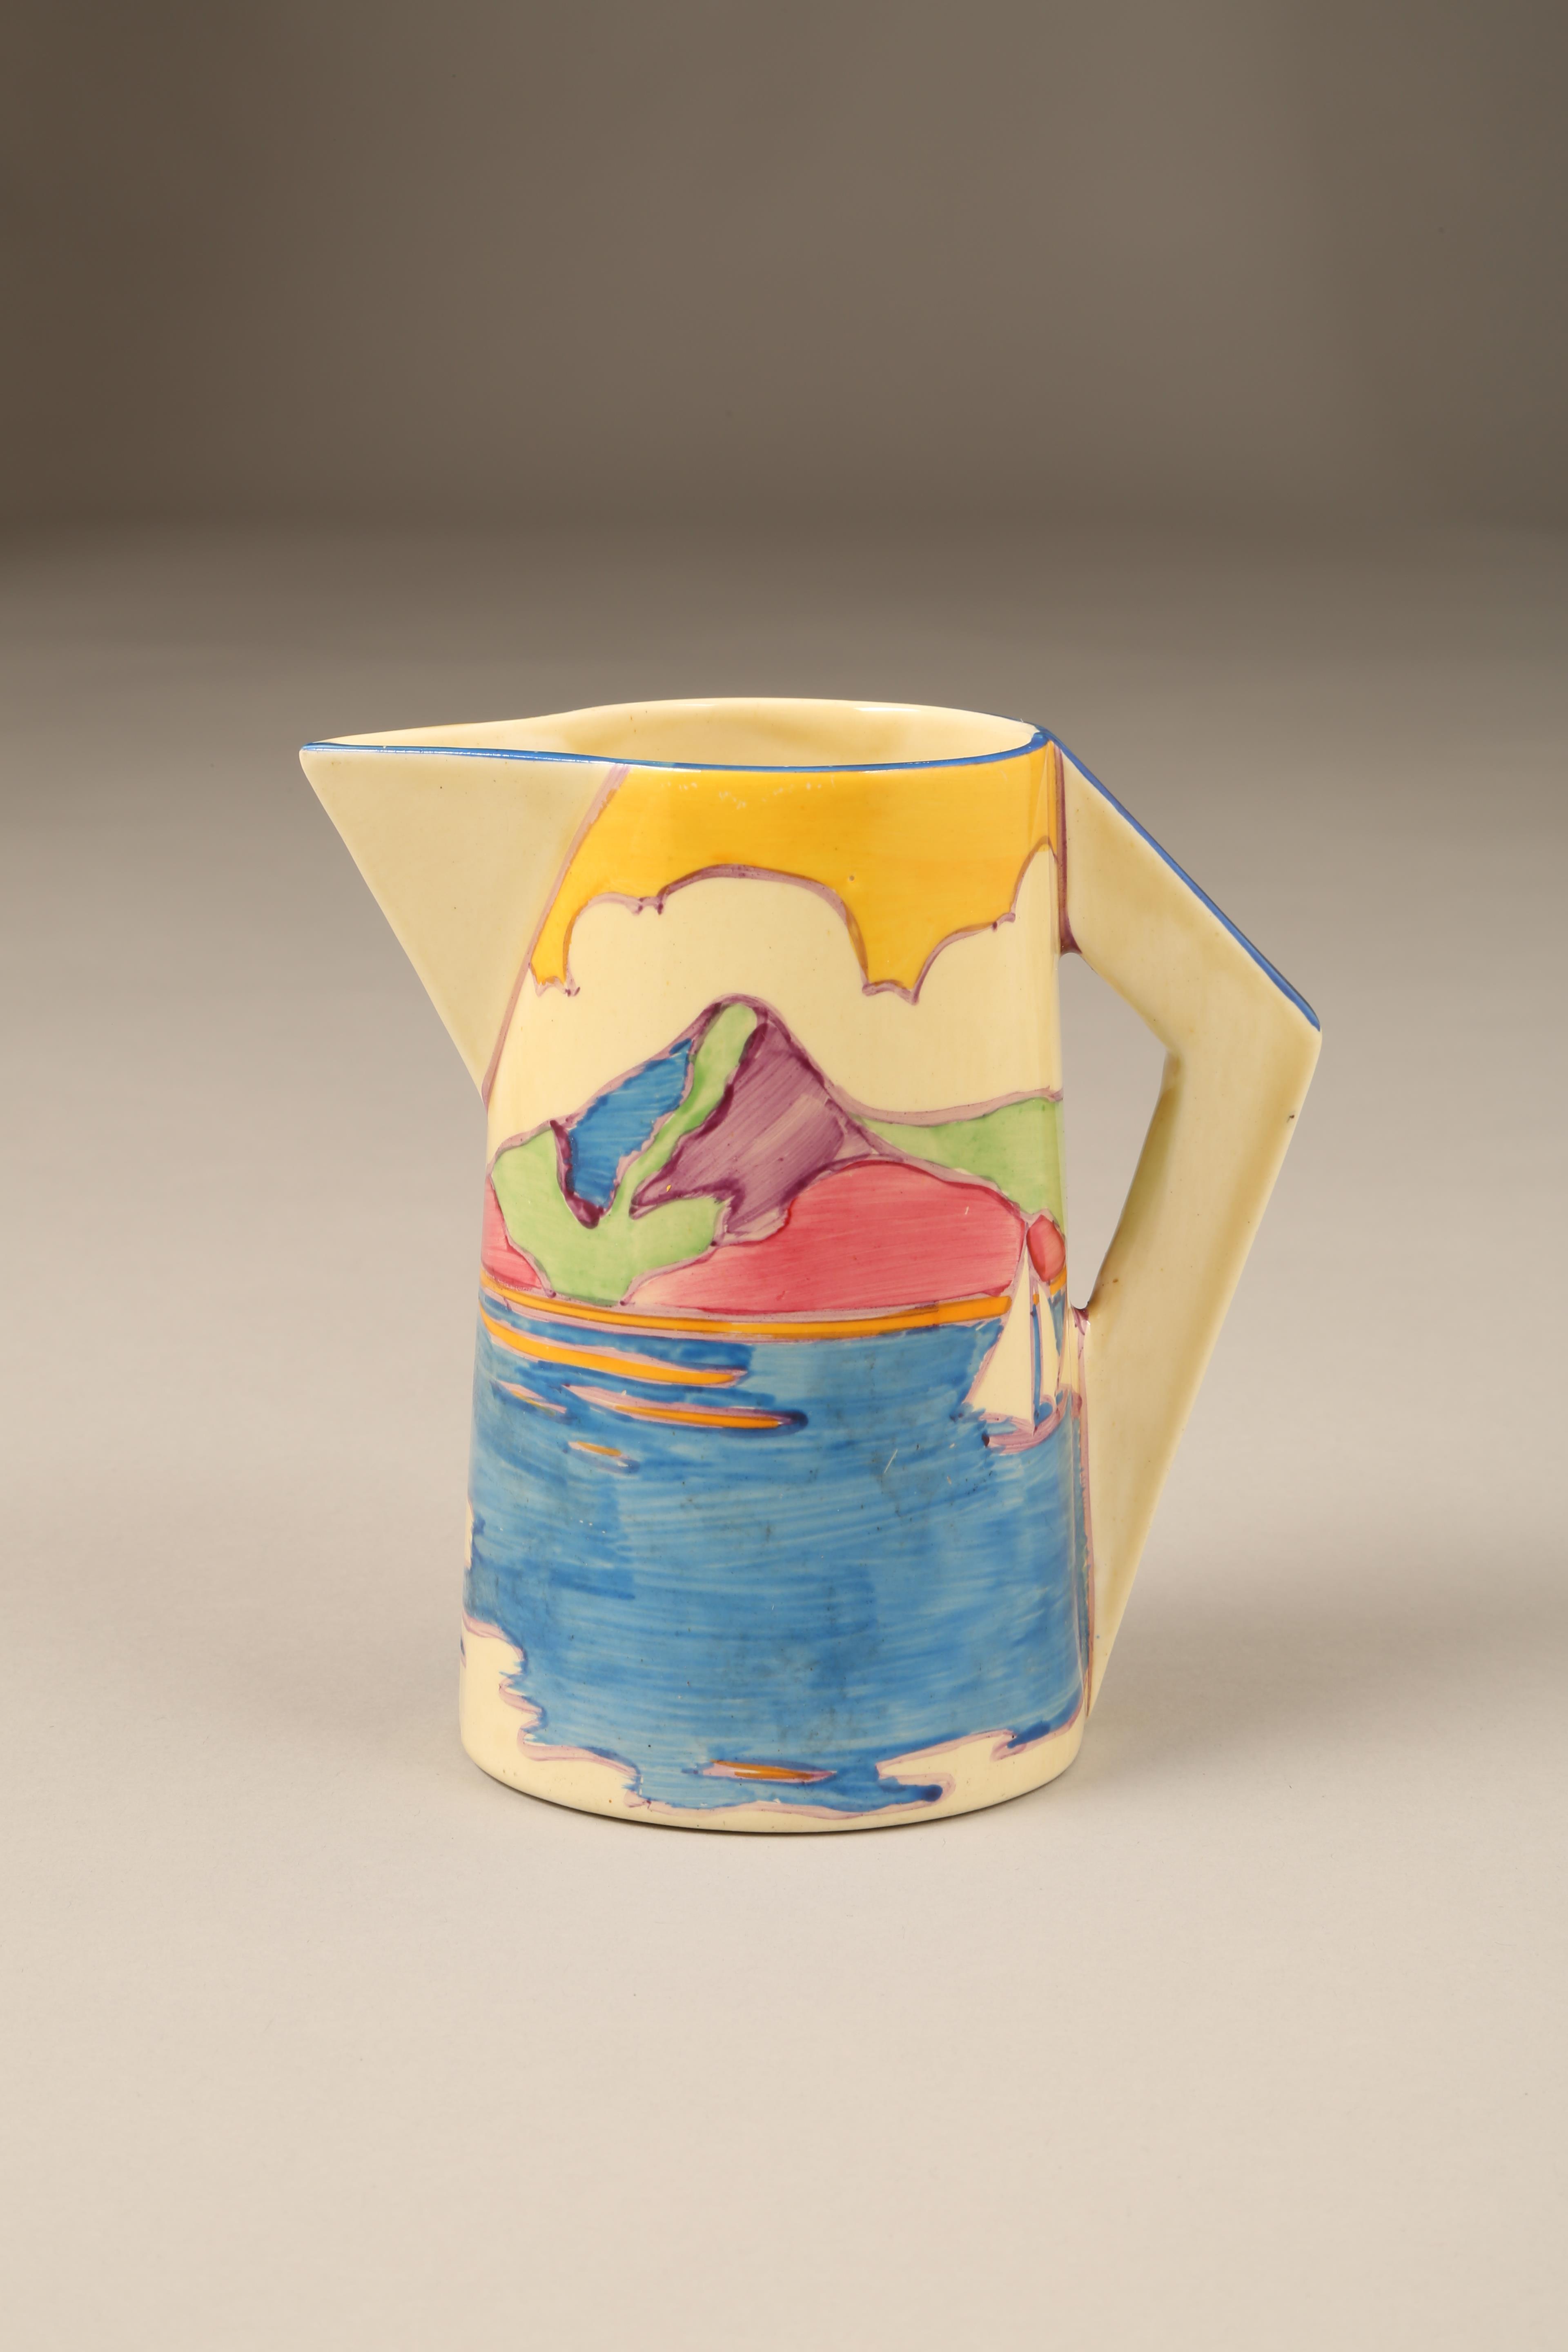 Clarice Cliff conical jug, in the Gibraltar Design, Fantasque and Bizarre marks. Height 13.5cm